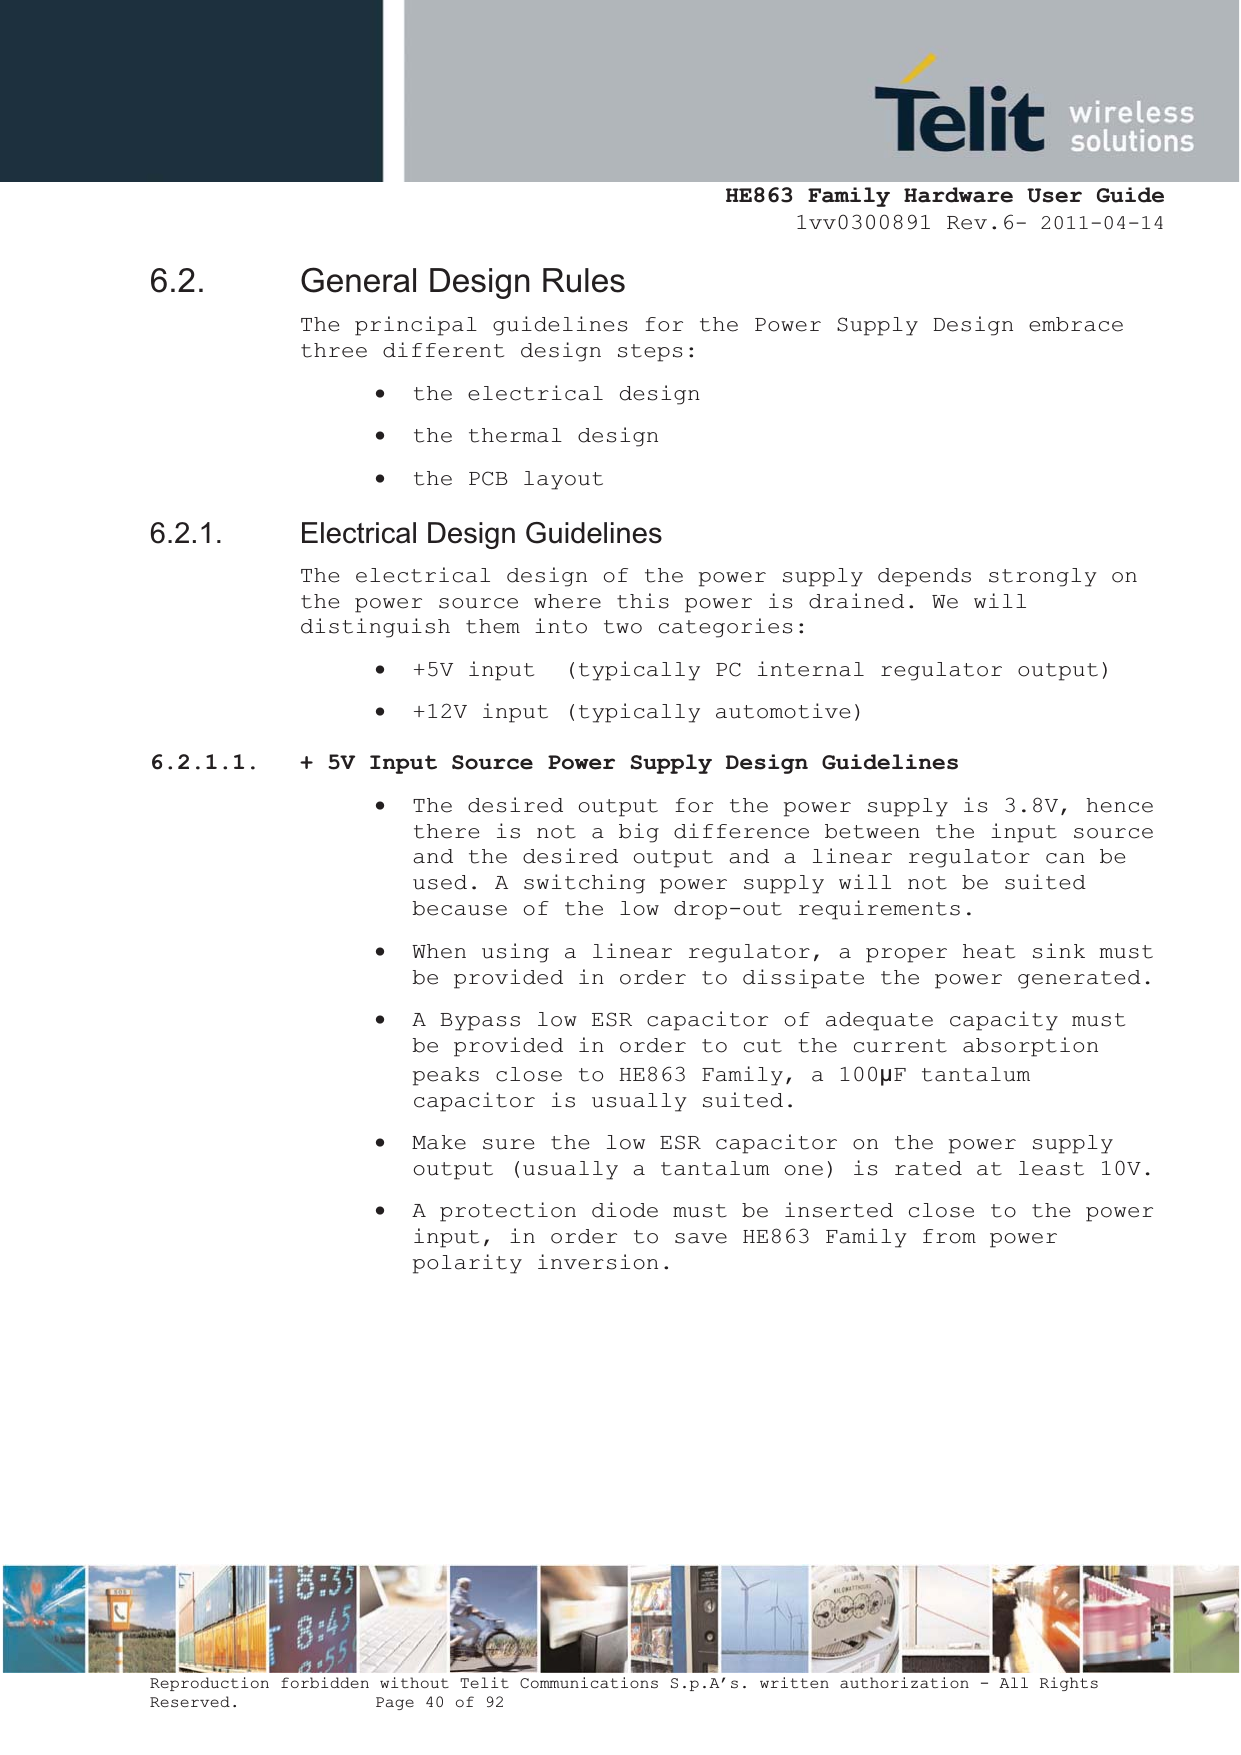  HE863 Family Hardware User Guide 1vv0300891 Rev.6- 2011-04-14    Reproduction forbidden without Telit Communications S.p.A’s. written authorization - All Rights Reserved.    Page 40 of 92  6.2. General Design Rules The principal guidelines for the Power Supply Design embrace three different design steps: x the electrical design x the thermal design x the PCB layout 6.2.1. Electrical Design Guidelines The electrical design of the power supply depends strongly on the power source where this power is drained. We will distinguish them into two categories: x +5V input  (typically PC internal regulator output) x +12V input (typically automotive) 6.2.1.1. + 5V Input Source Power Supply Design Guidelines x The desired output for the power supply is 3.8V, hence there is not a big difference between the input source and the desired output and a linear regulator can be used. A switching power supply will not be suited because of the low drop-out requirements. x When using a linear regulator, a proper heat sink must be provided in order to dissipate the power generated. x A Bypass low ESR capacitor of adequate capacity must be provided in order to cut the current absorption peaks close to HE863 Family, a 100ȝF tantalum capacitor is usually suited. x Make sure the low ESR capacitor on the power supply output (usually a tantalum one) is rated at least 10V. x A protection diode must be inserted close to the power input, in order to save HE863 Family from power polarity inversion.       